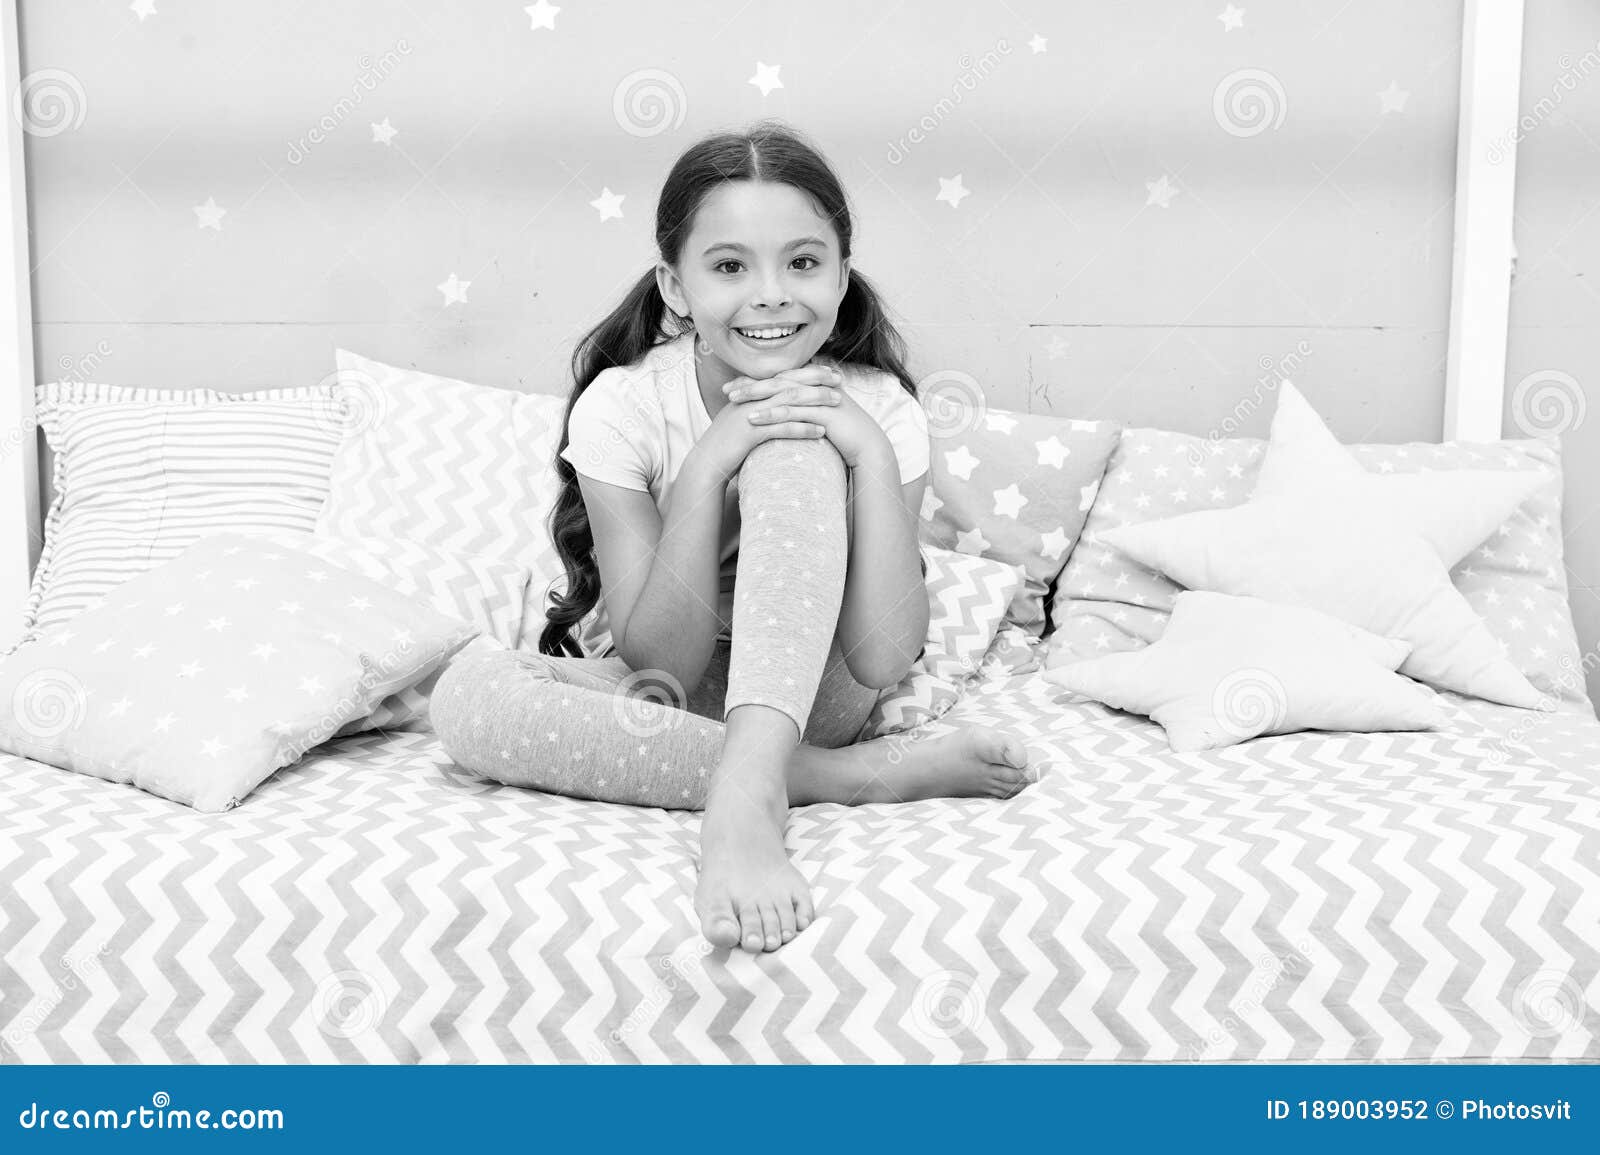 Comfortable and Cozy. Little Child Feel Comfortable at Home. Small Girl ...